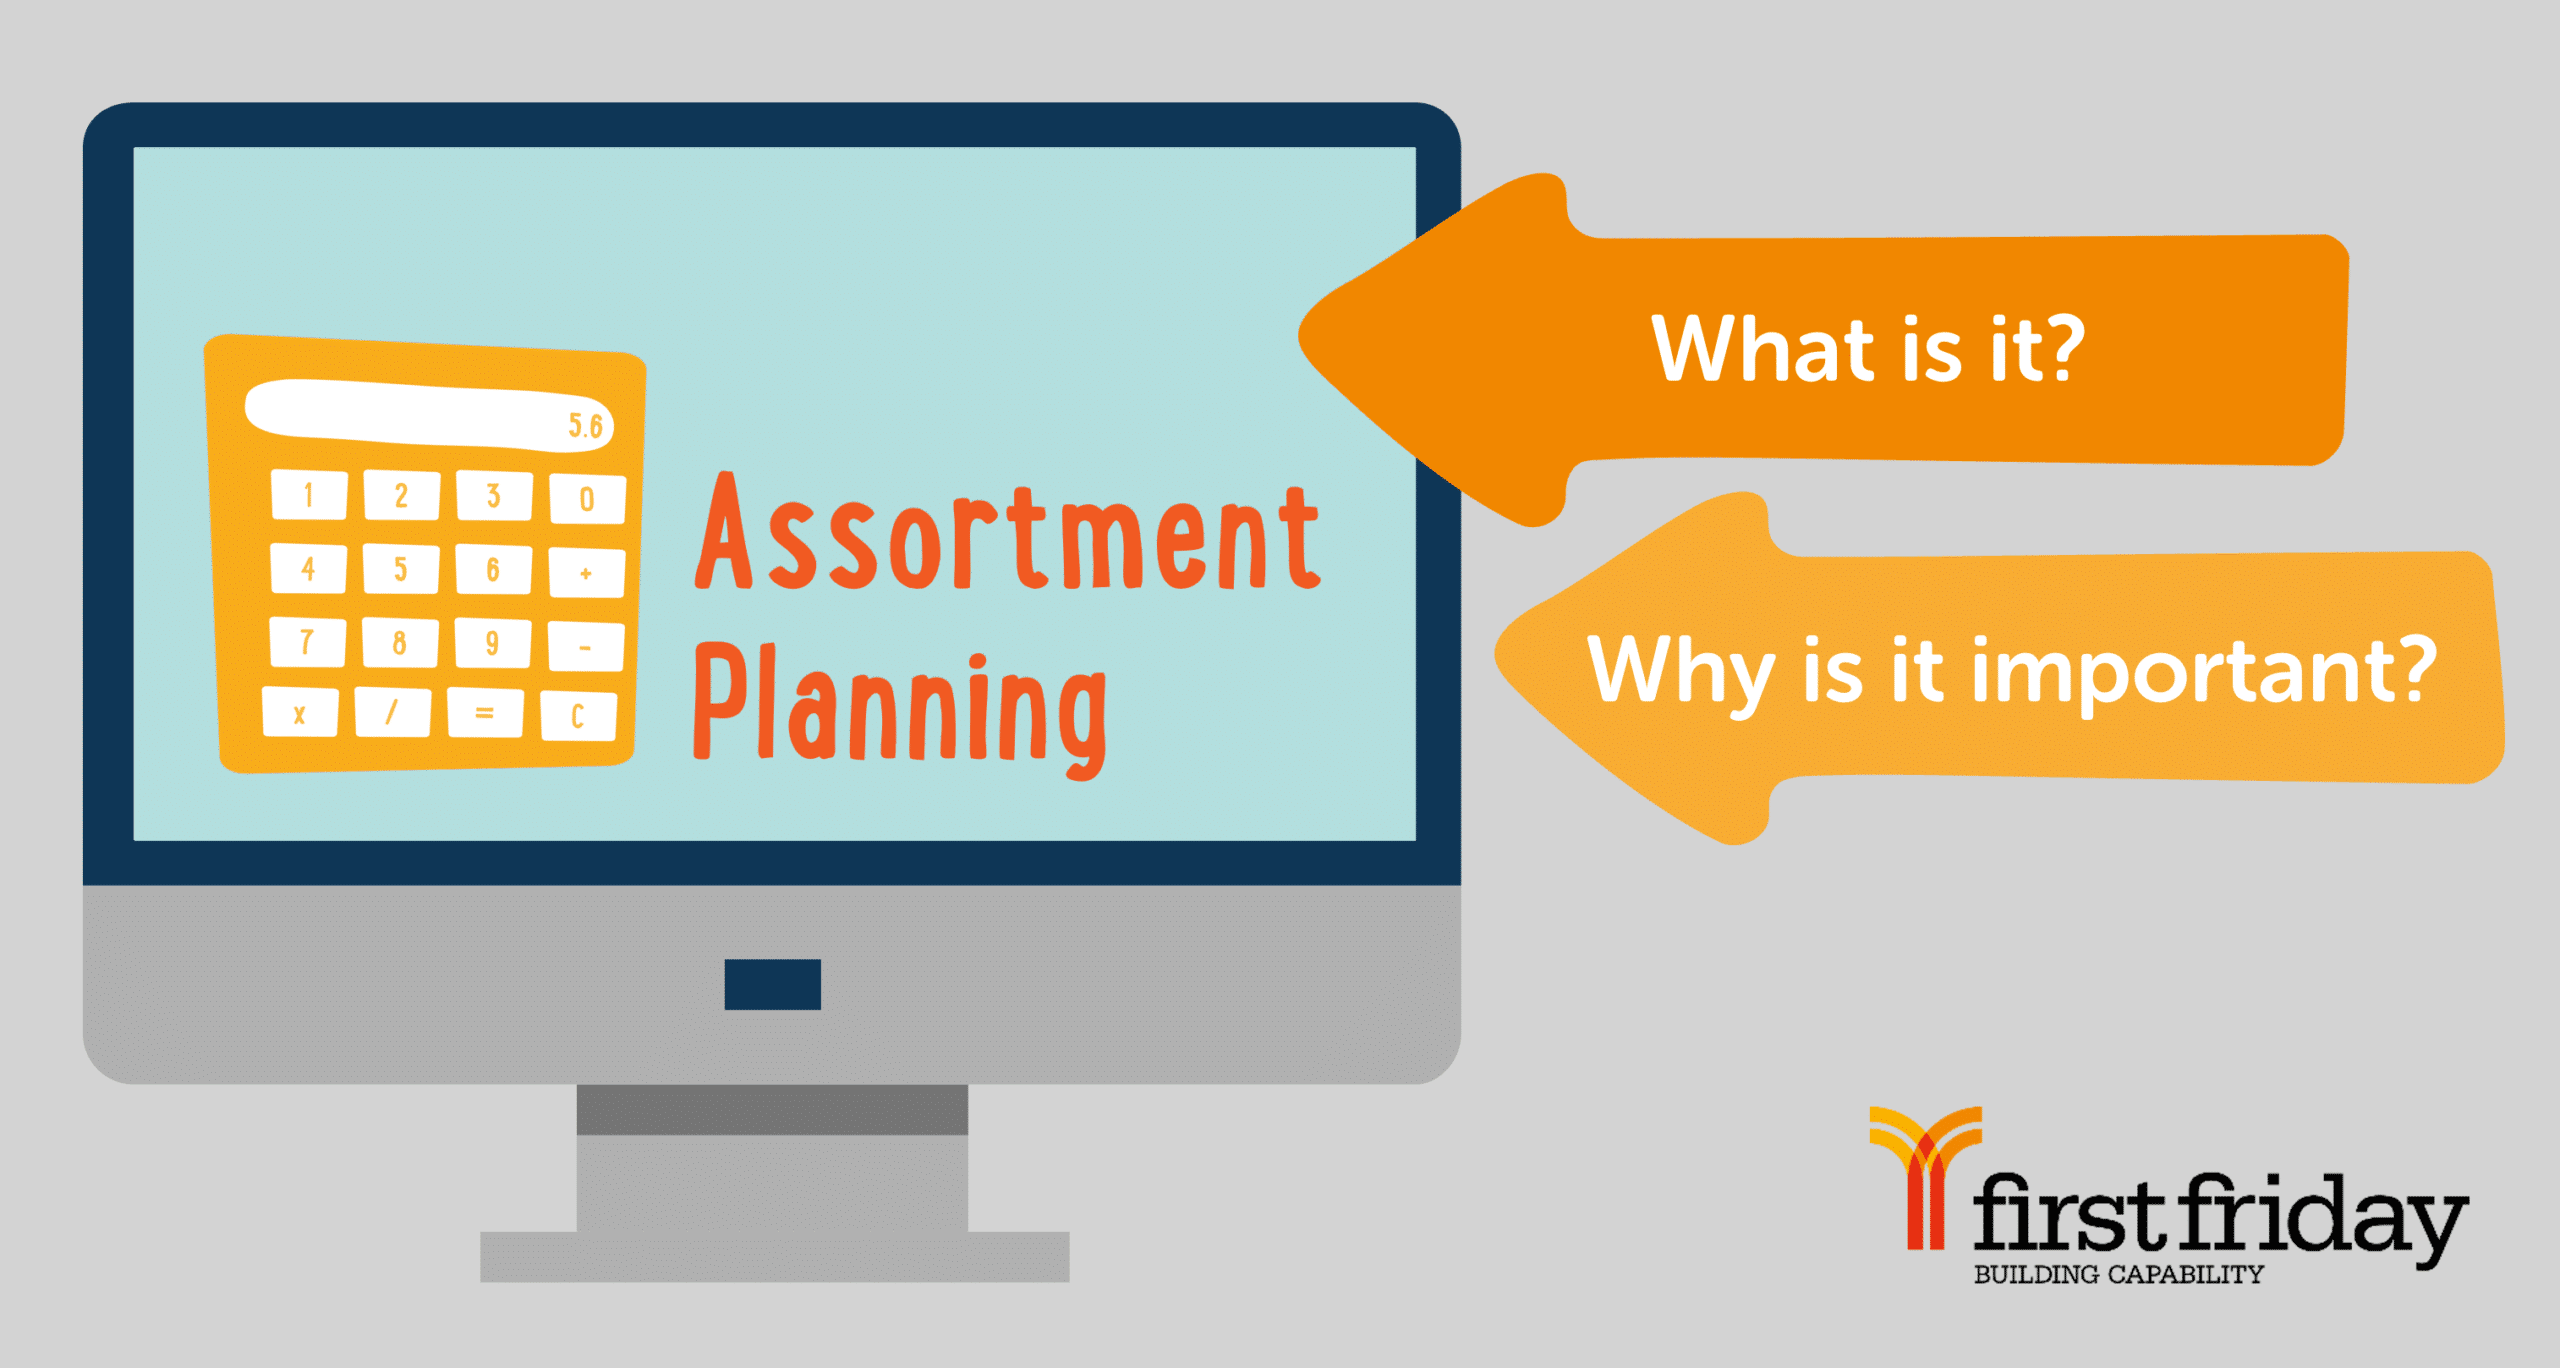 Assortment Planning. What is it? Why is it important?